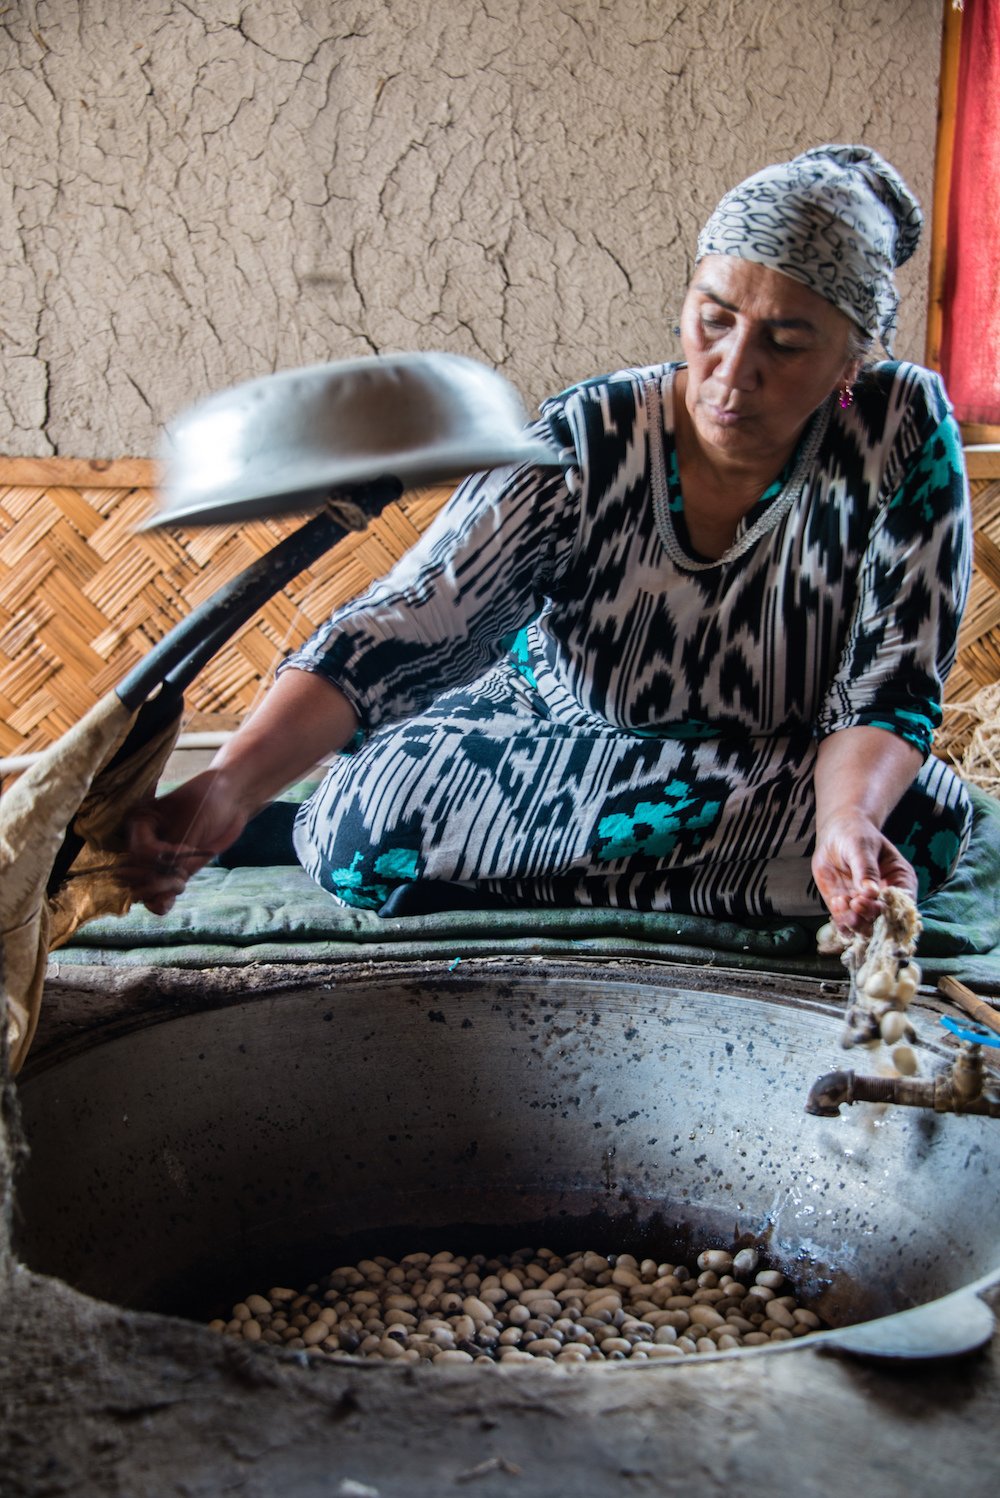 Woman boiling silk cocoons. Image: 2008+ under a CC licence